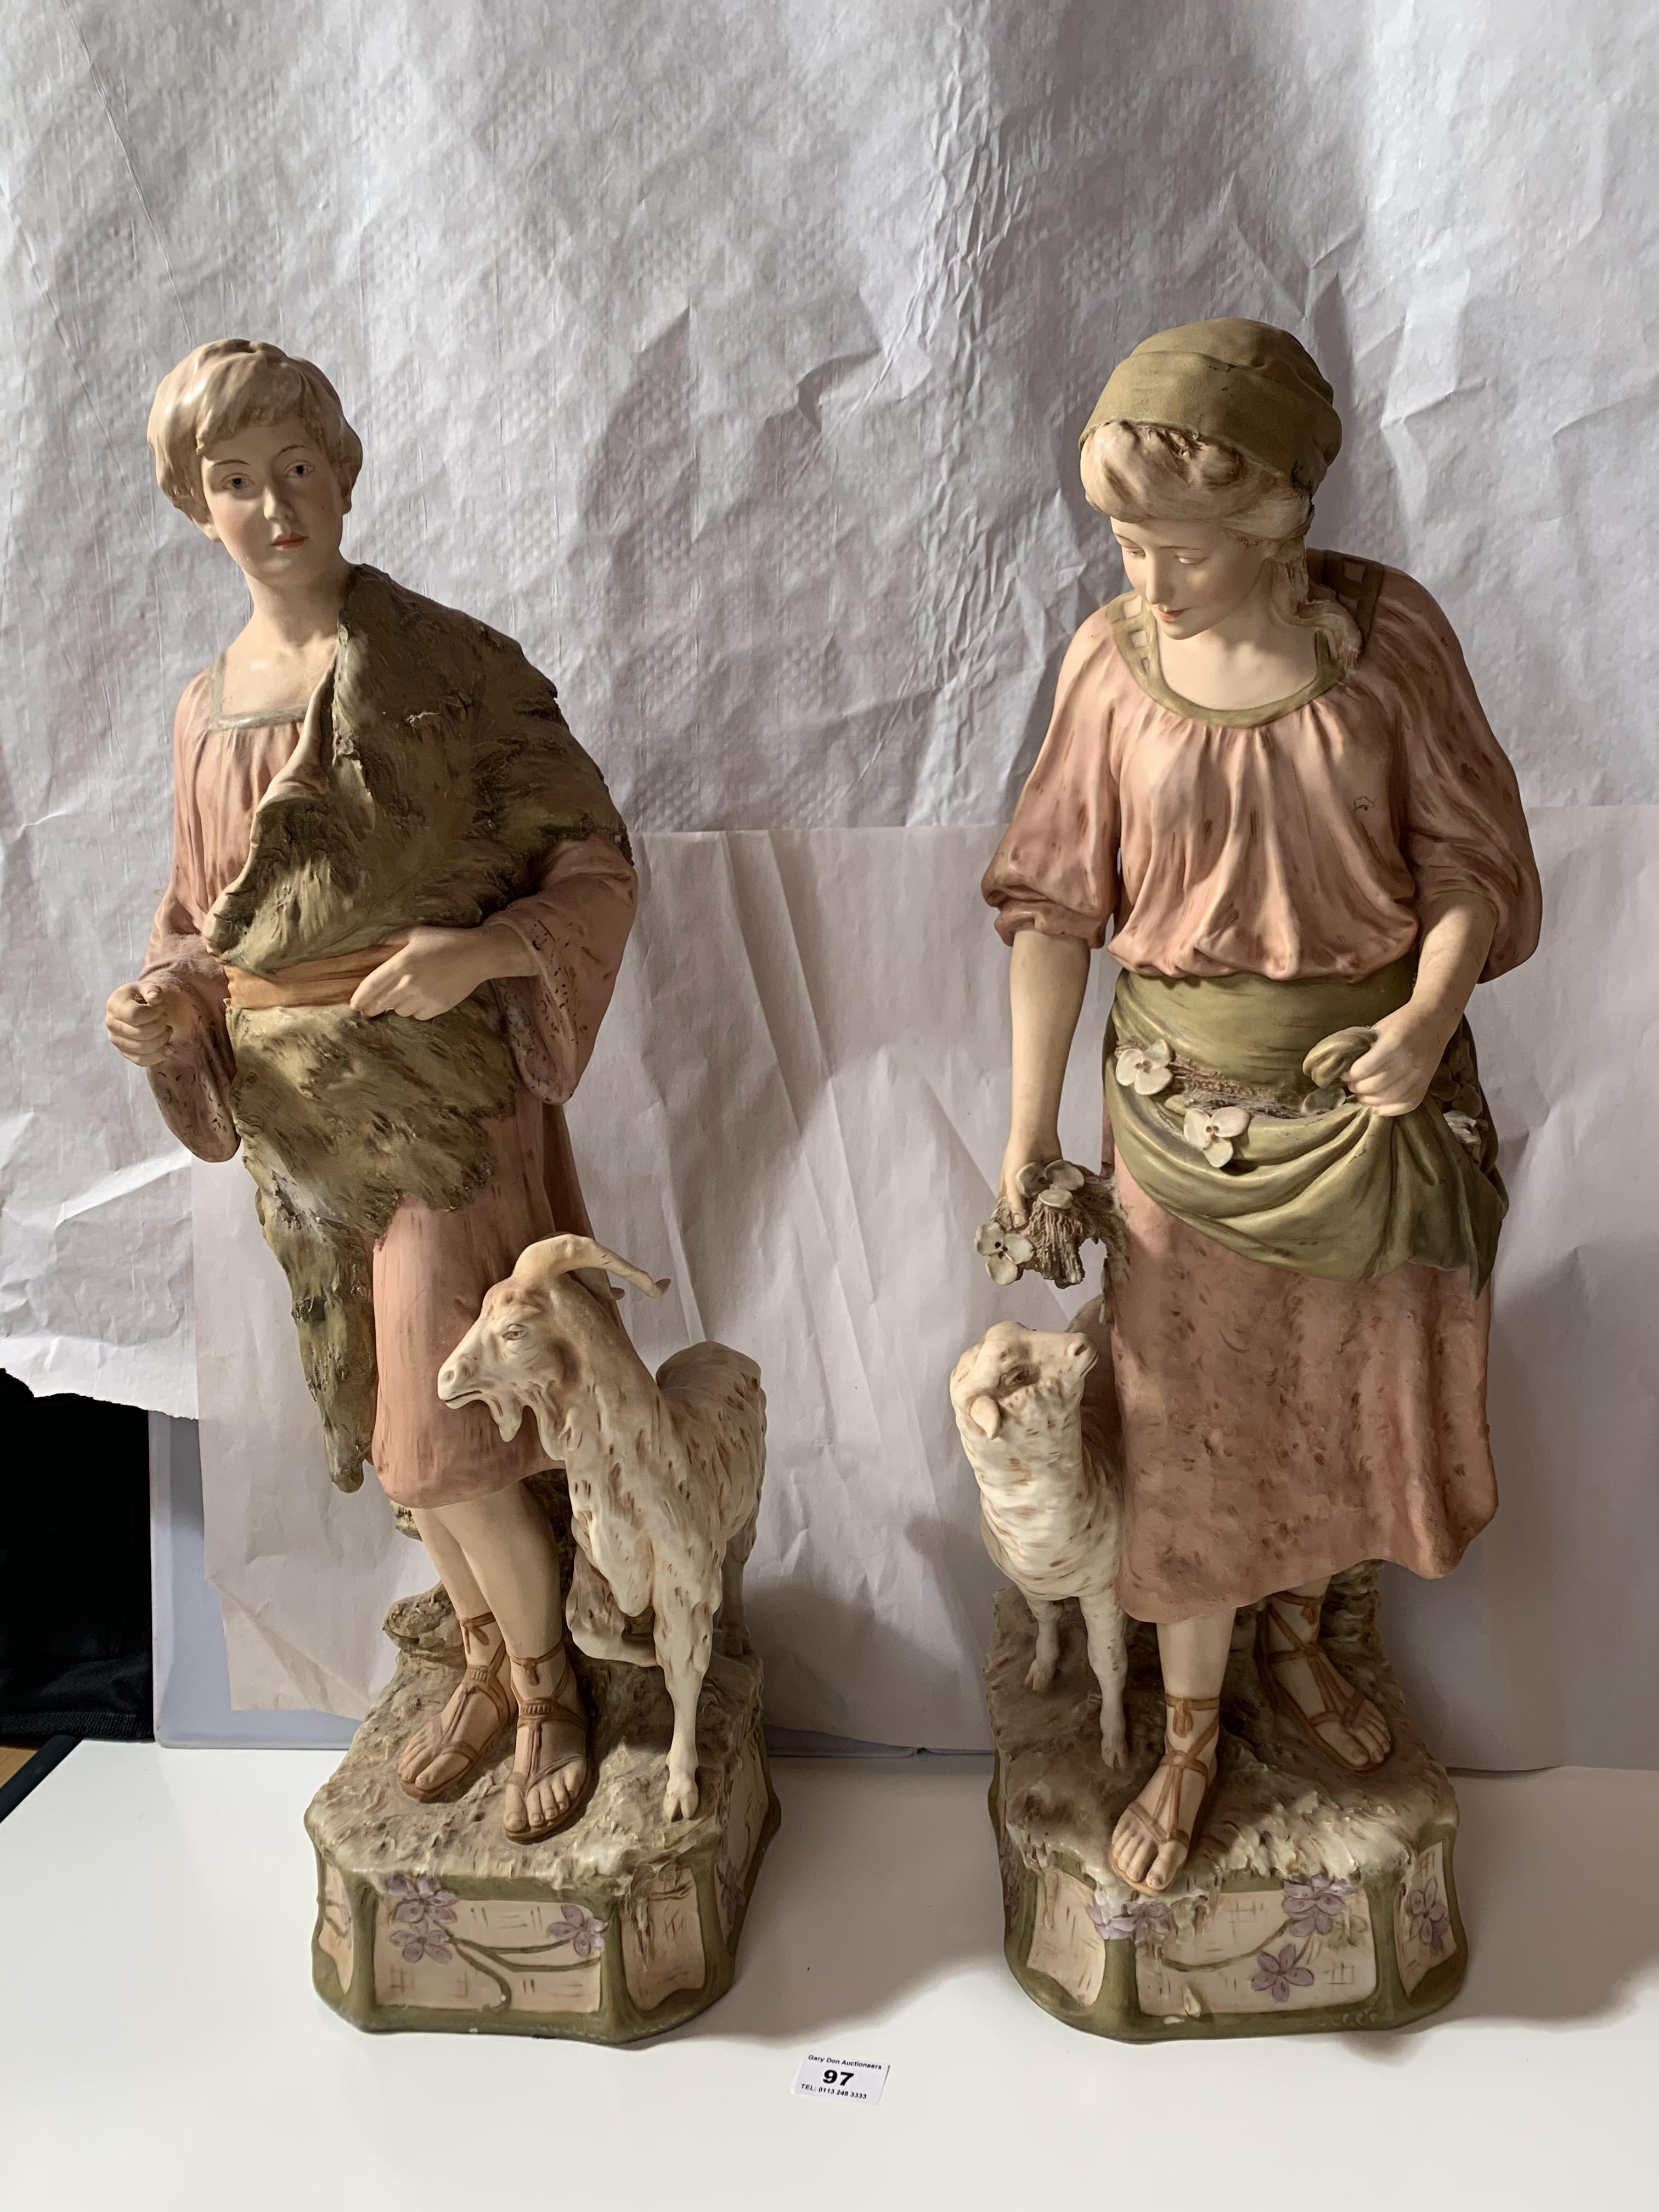 Large pair of Royal Dux figures, boy and girl goatherds. Numbered 1101 and 1102. Boy is 26” (66cm)